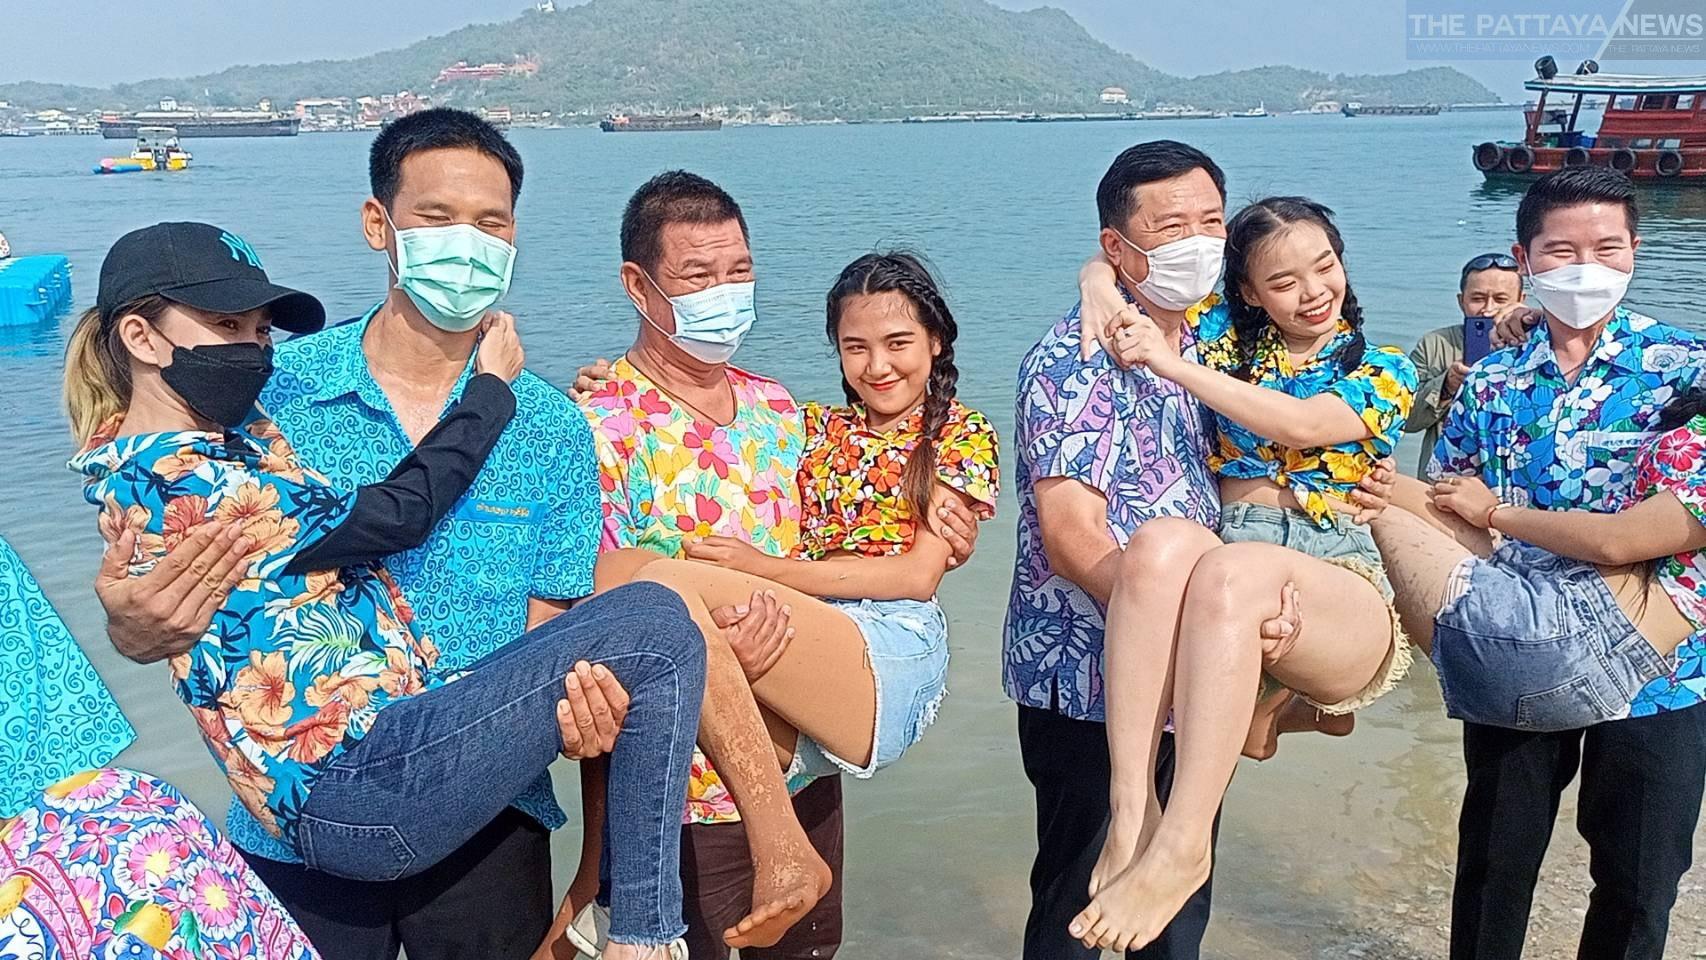 Tourists flock to Koh Kham Yai Beach while Koh Si Chang officials host Songkran “Carrying Girls into Water” event in Chonburi